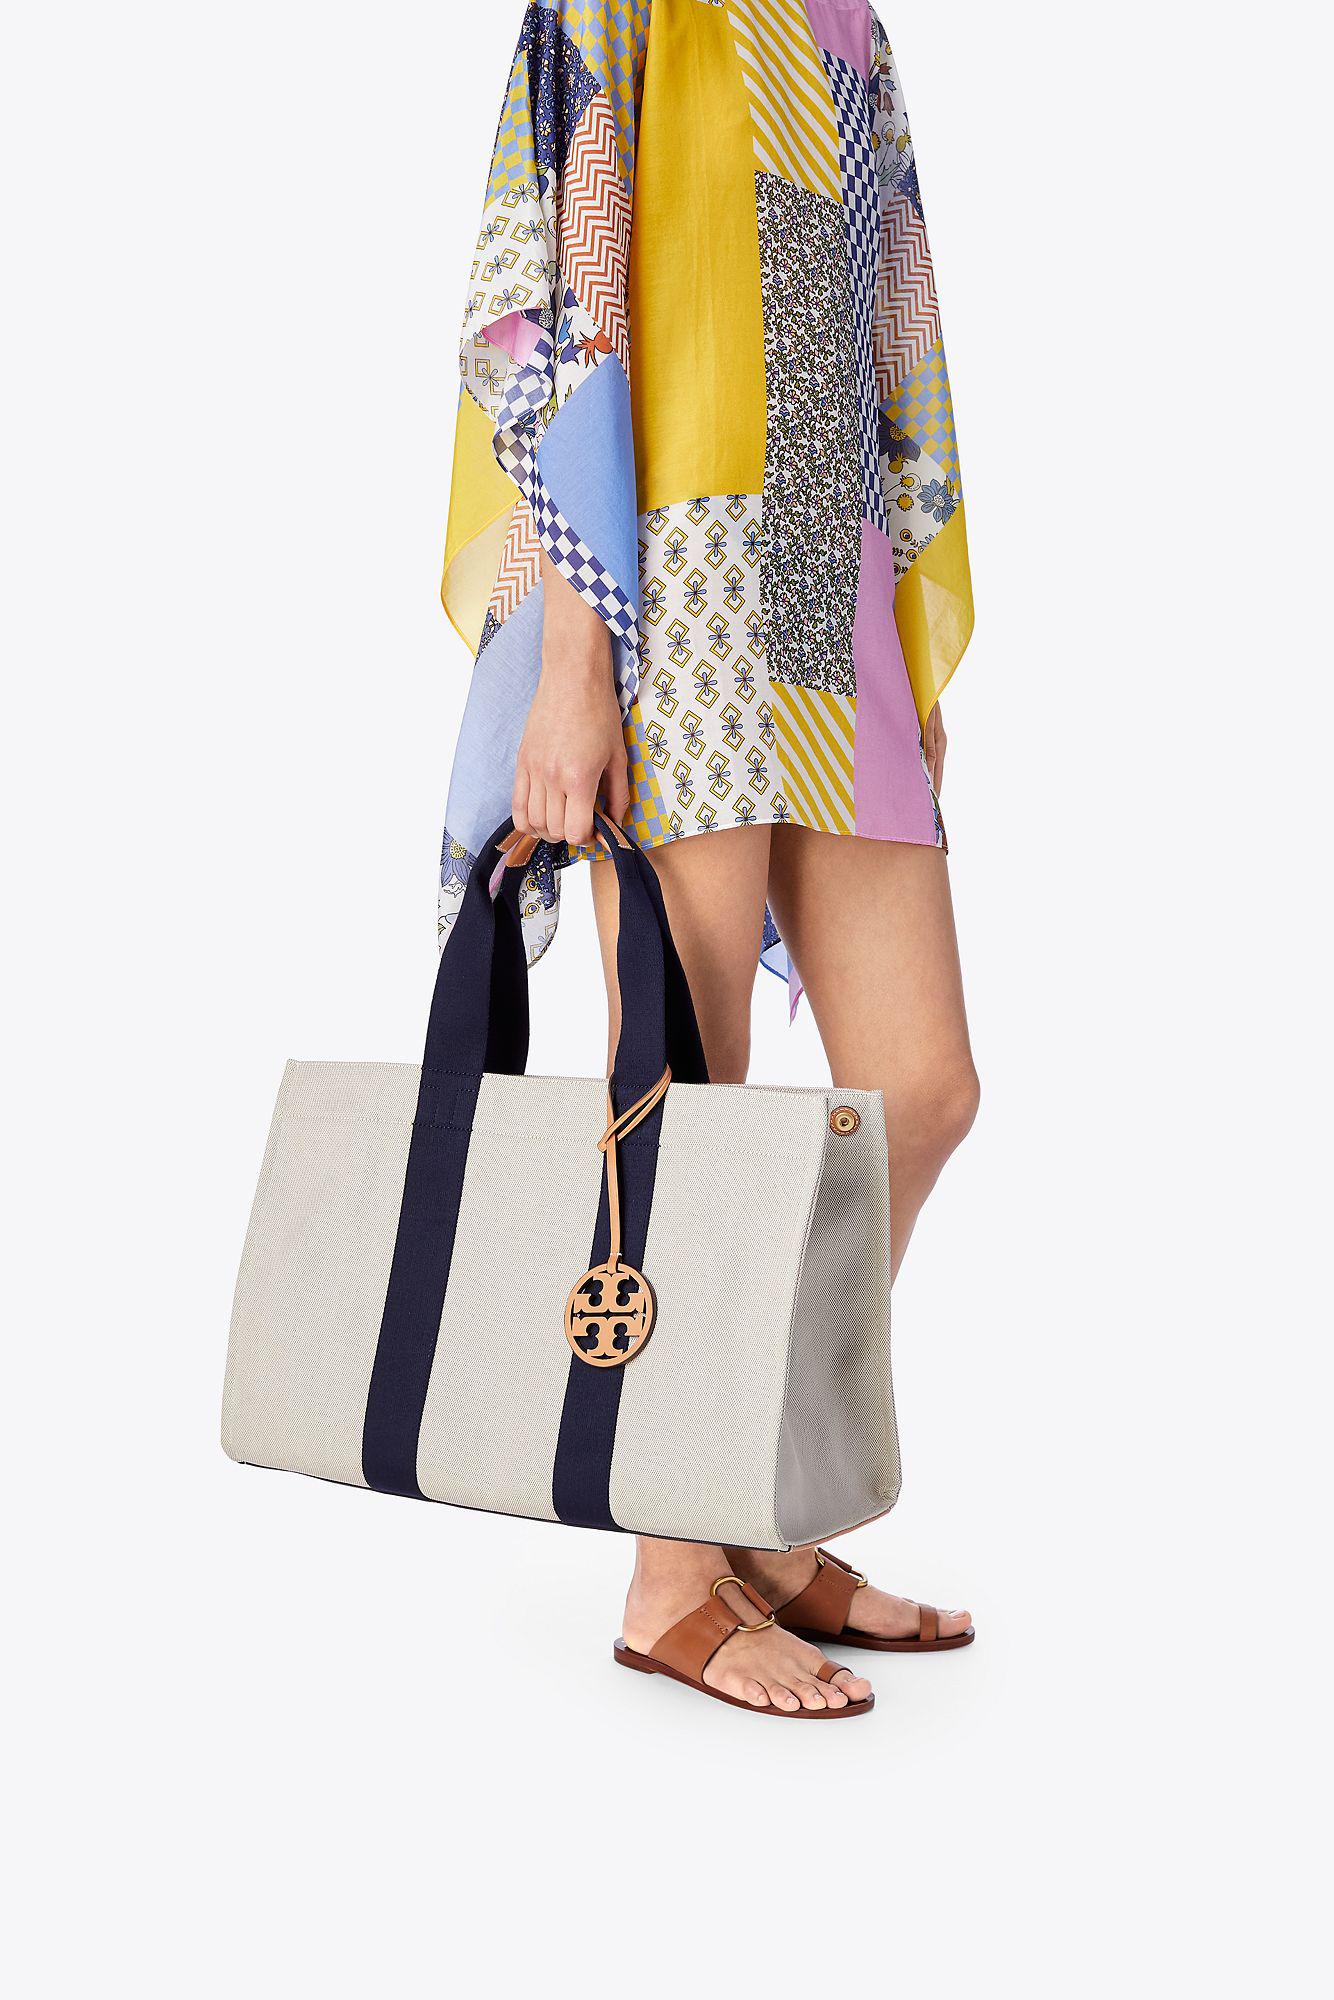 Tory Burch Brown, Pattern Print Coated Canvas Tote Bag